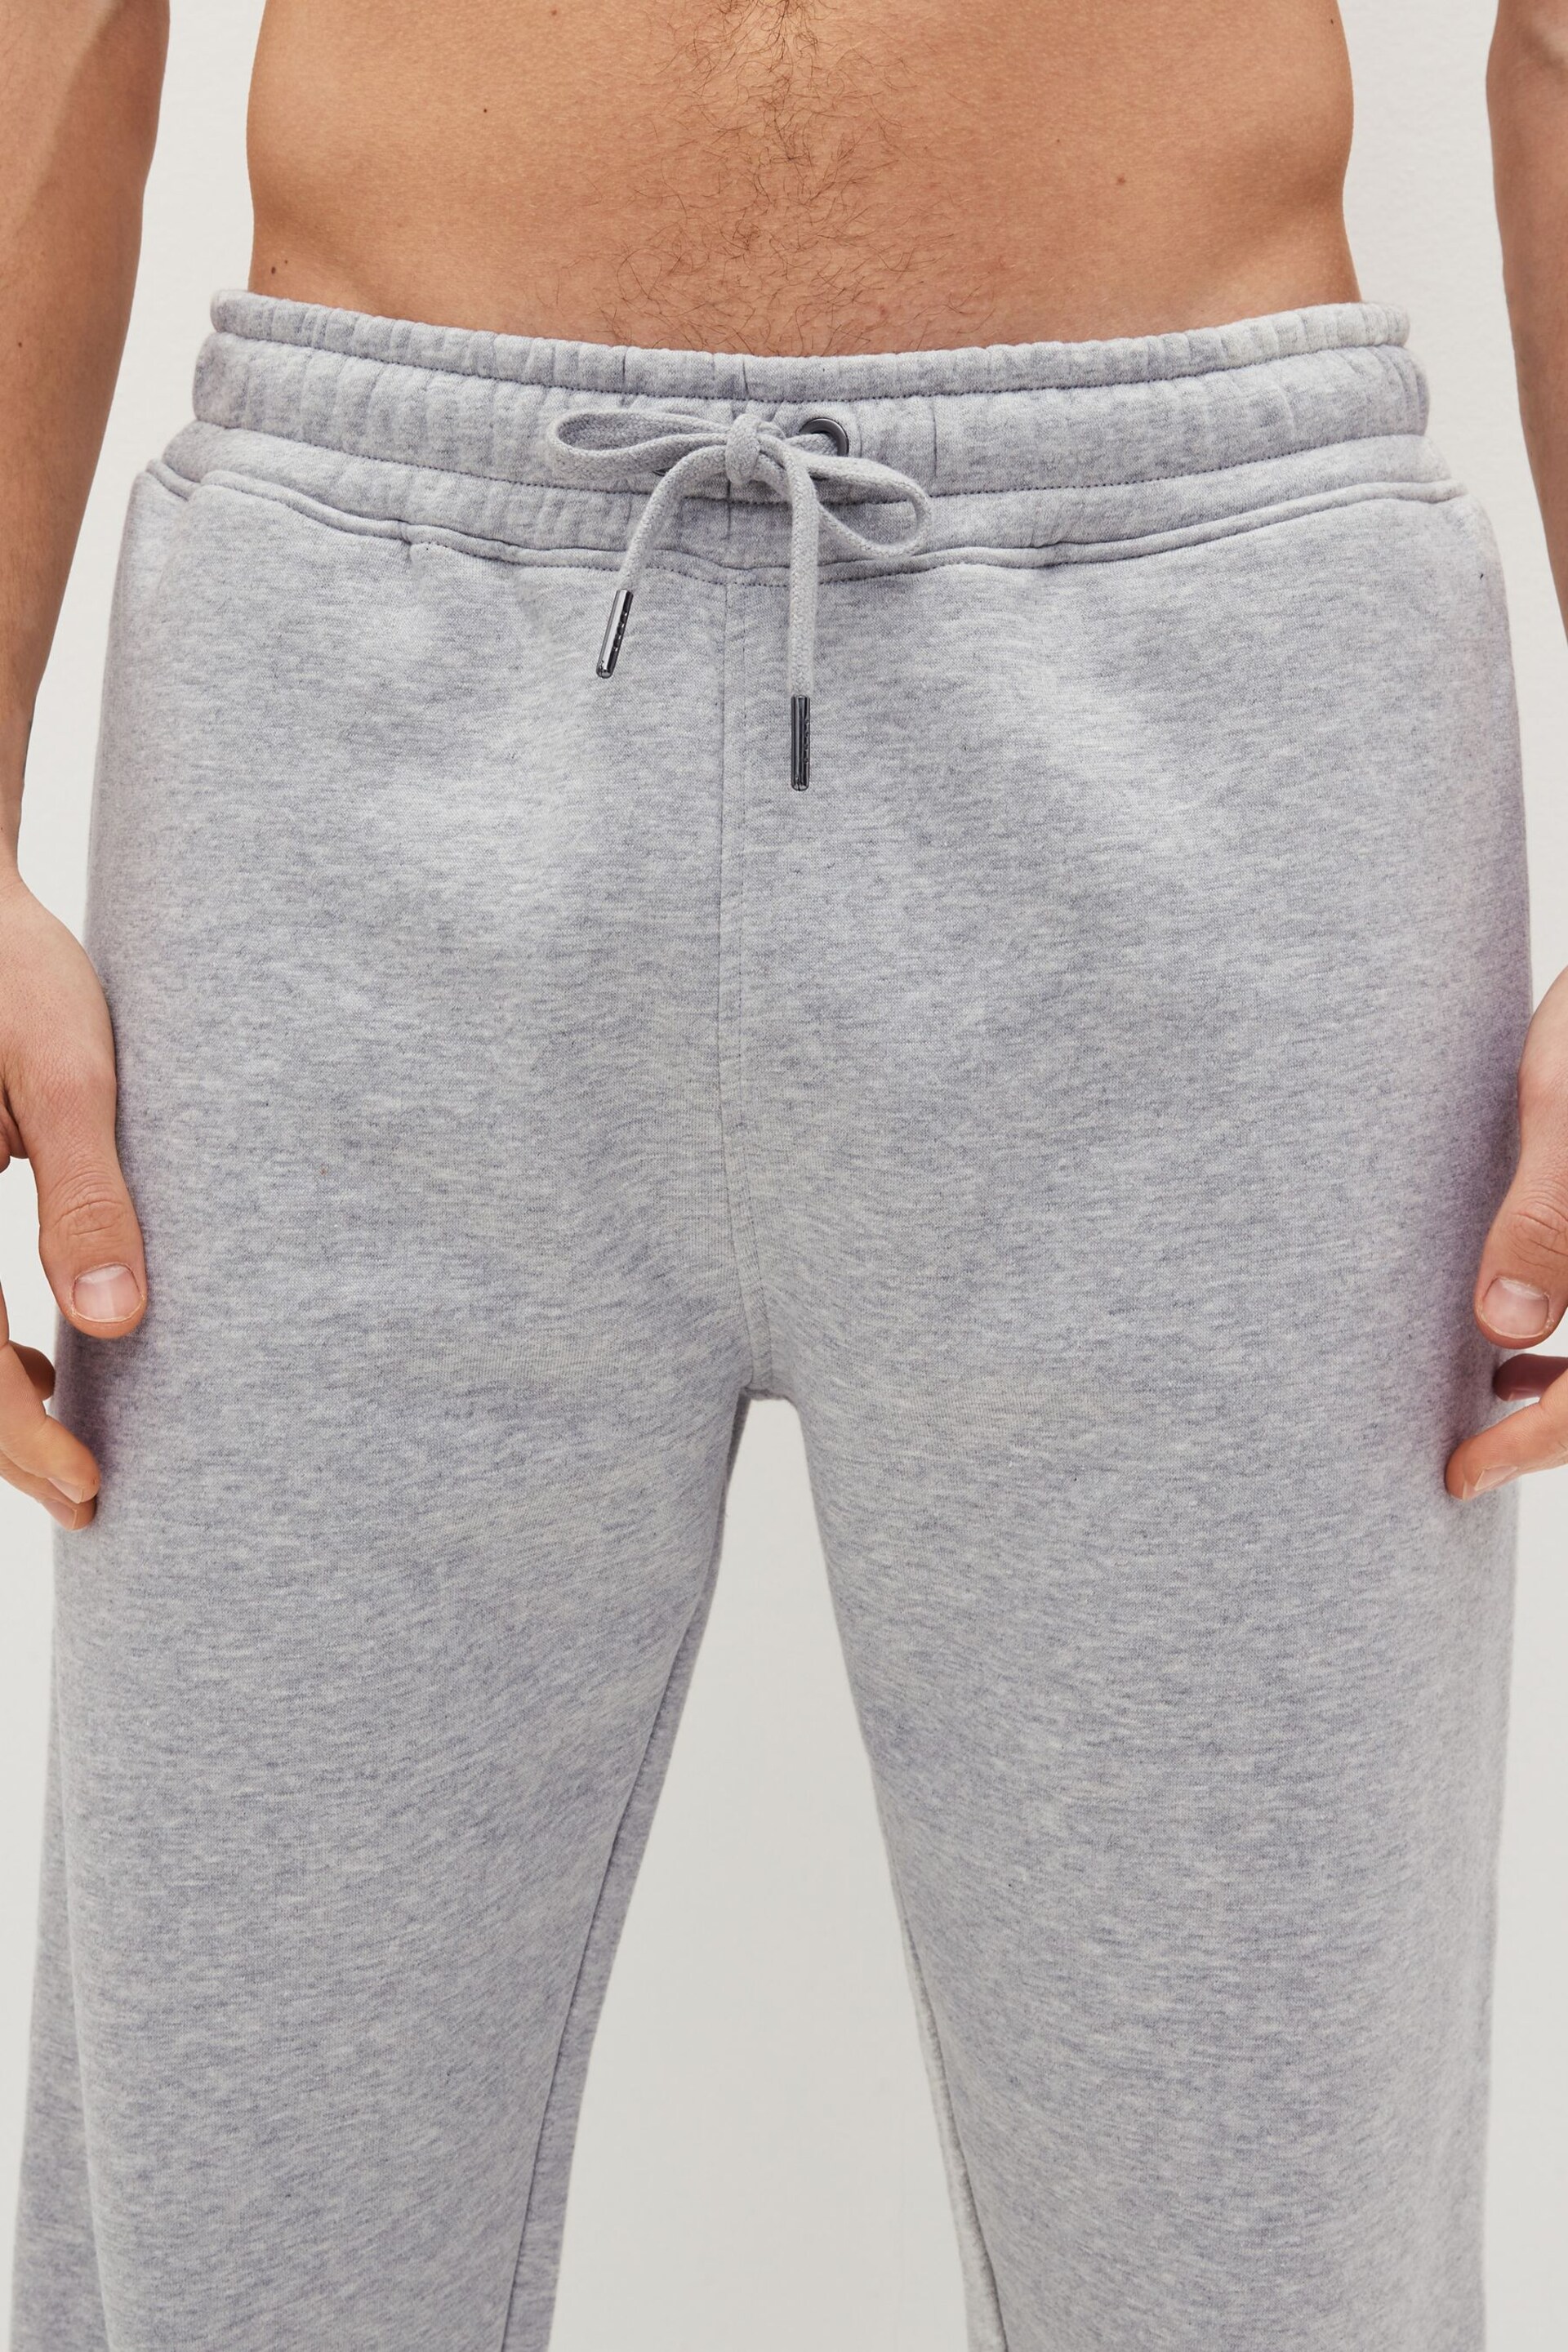 Light Grey Relaxed Fit Cotton Blend Cuffed Joggers - Image 3 of 5